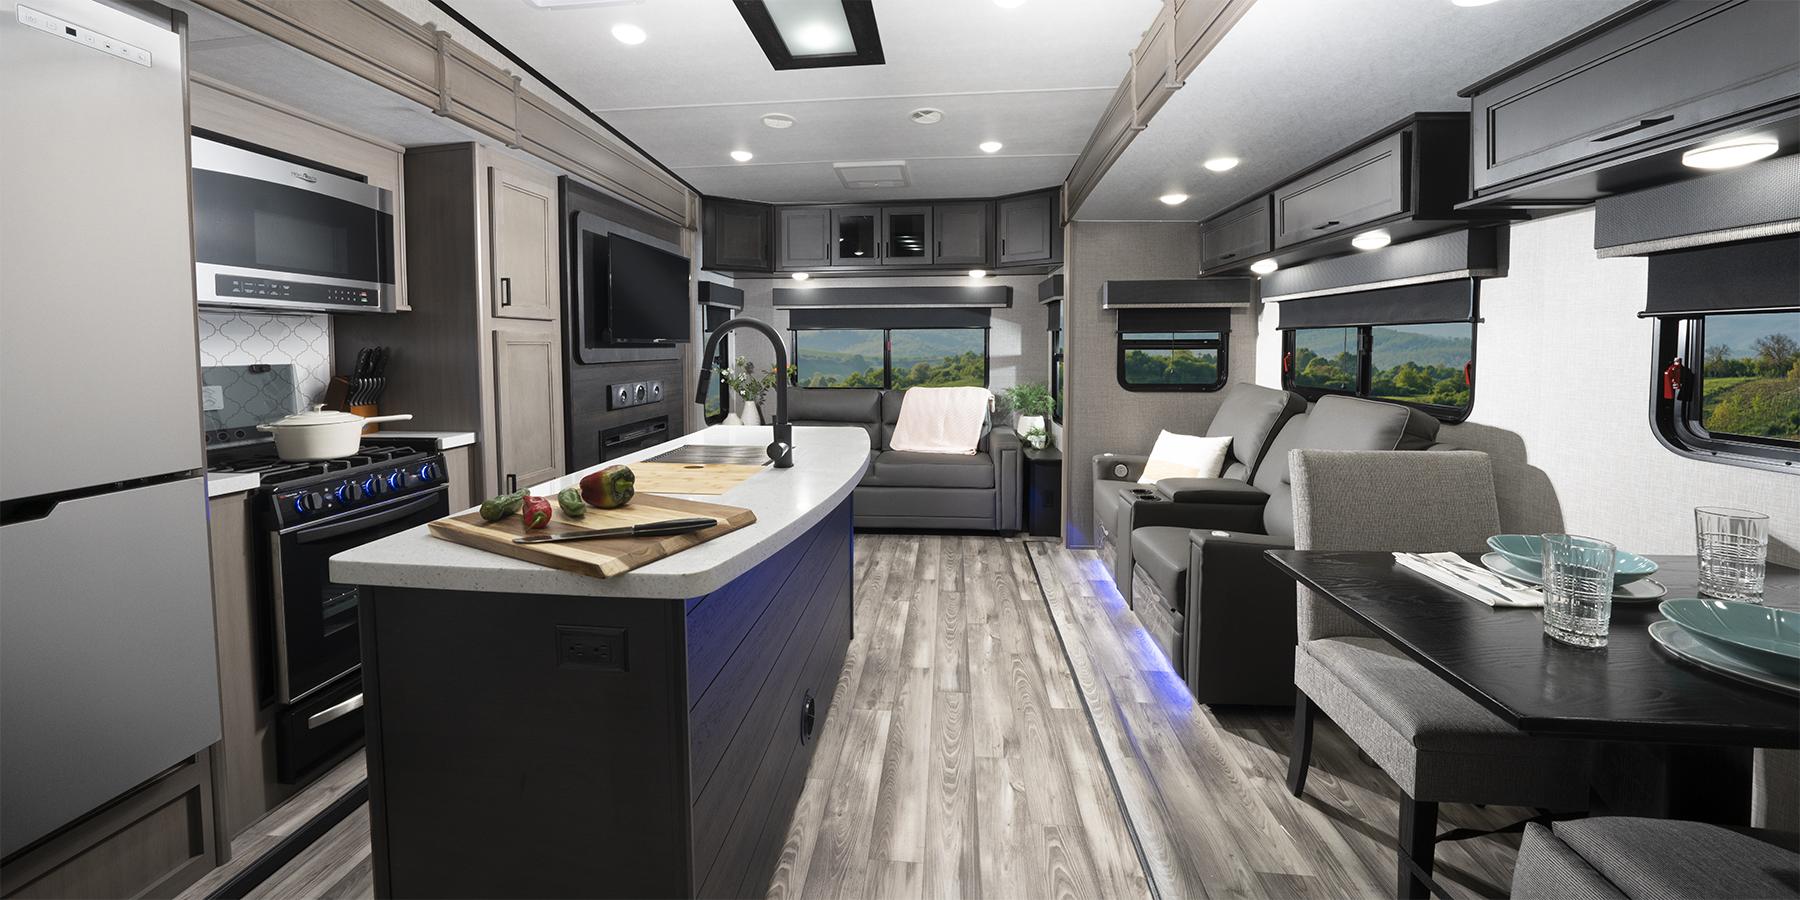 2023 354MBH GSL Fifth Wheel - Front to back